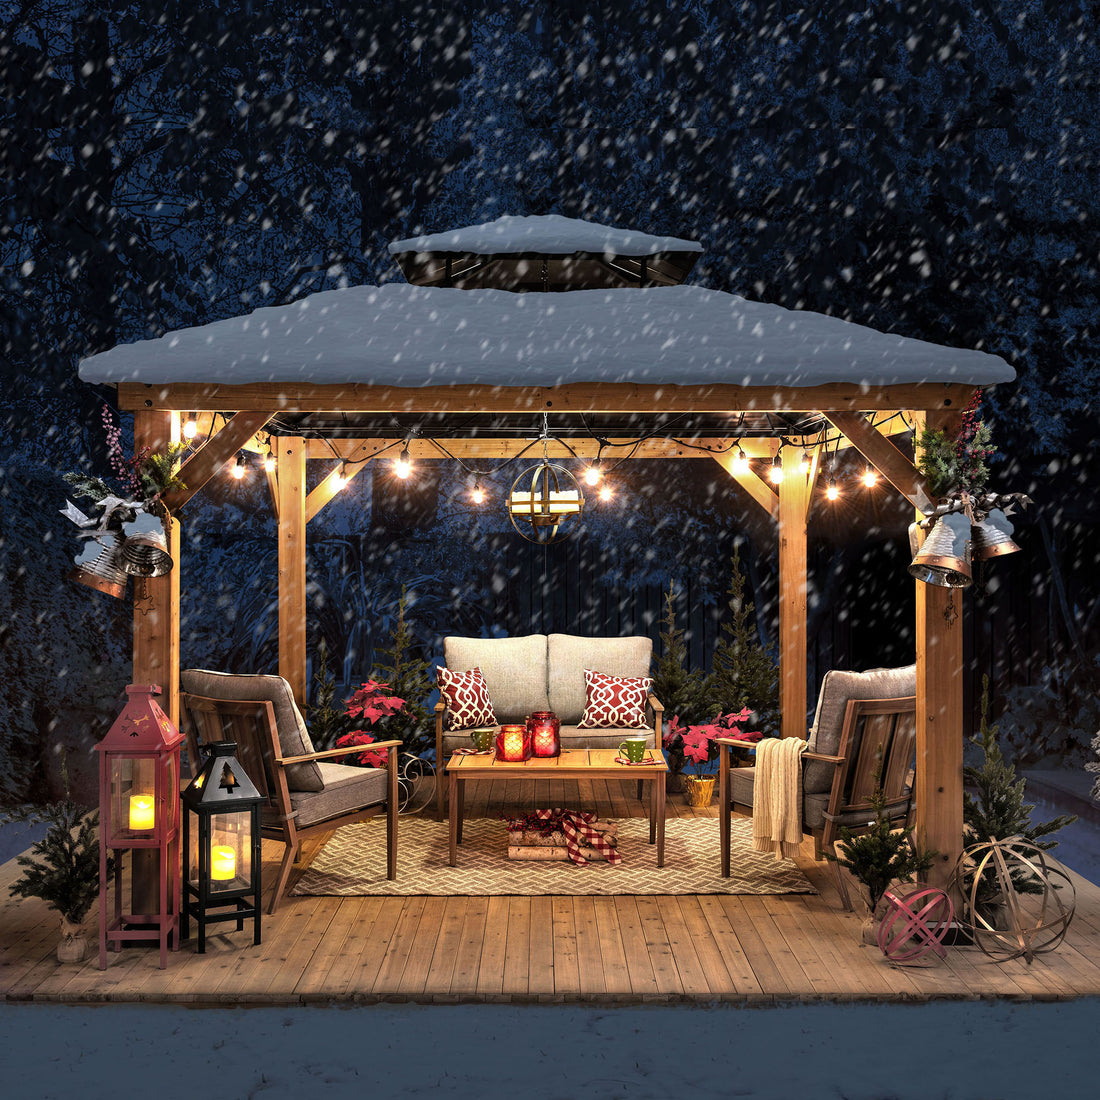 3 Ways To Winterize Your Outdoor Space